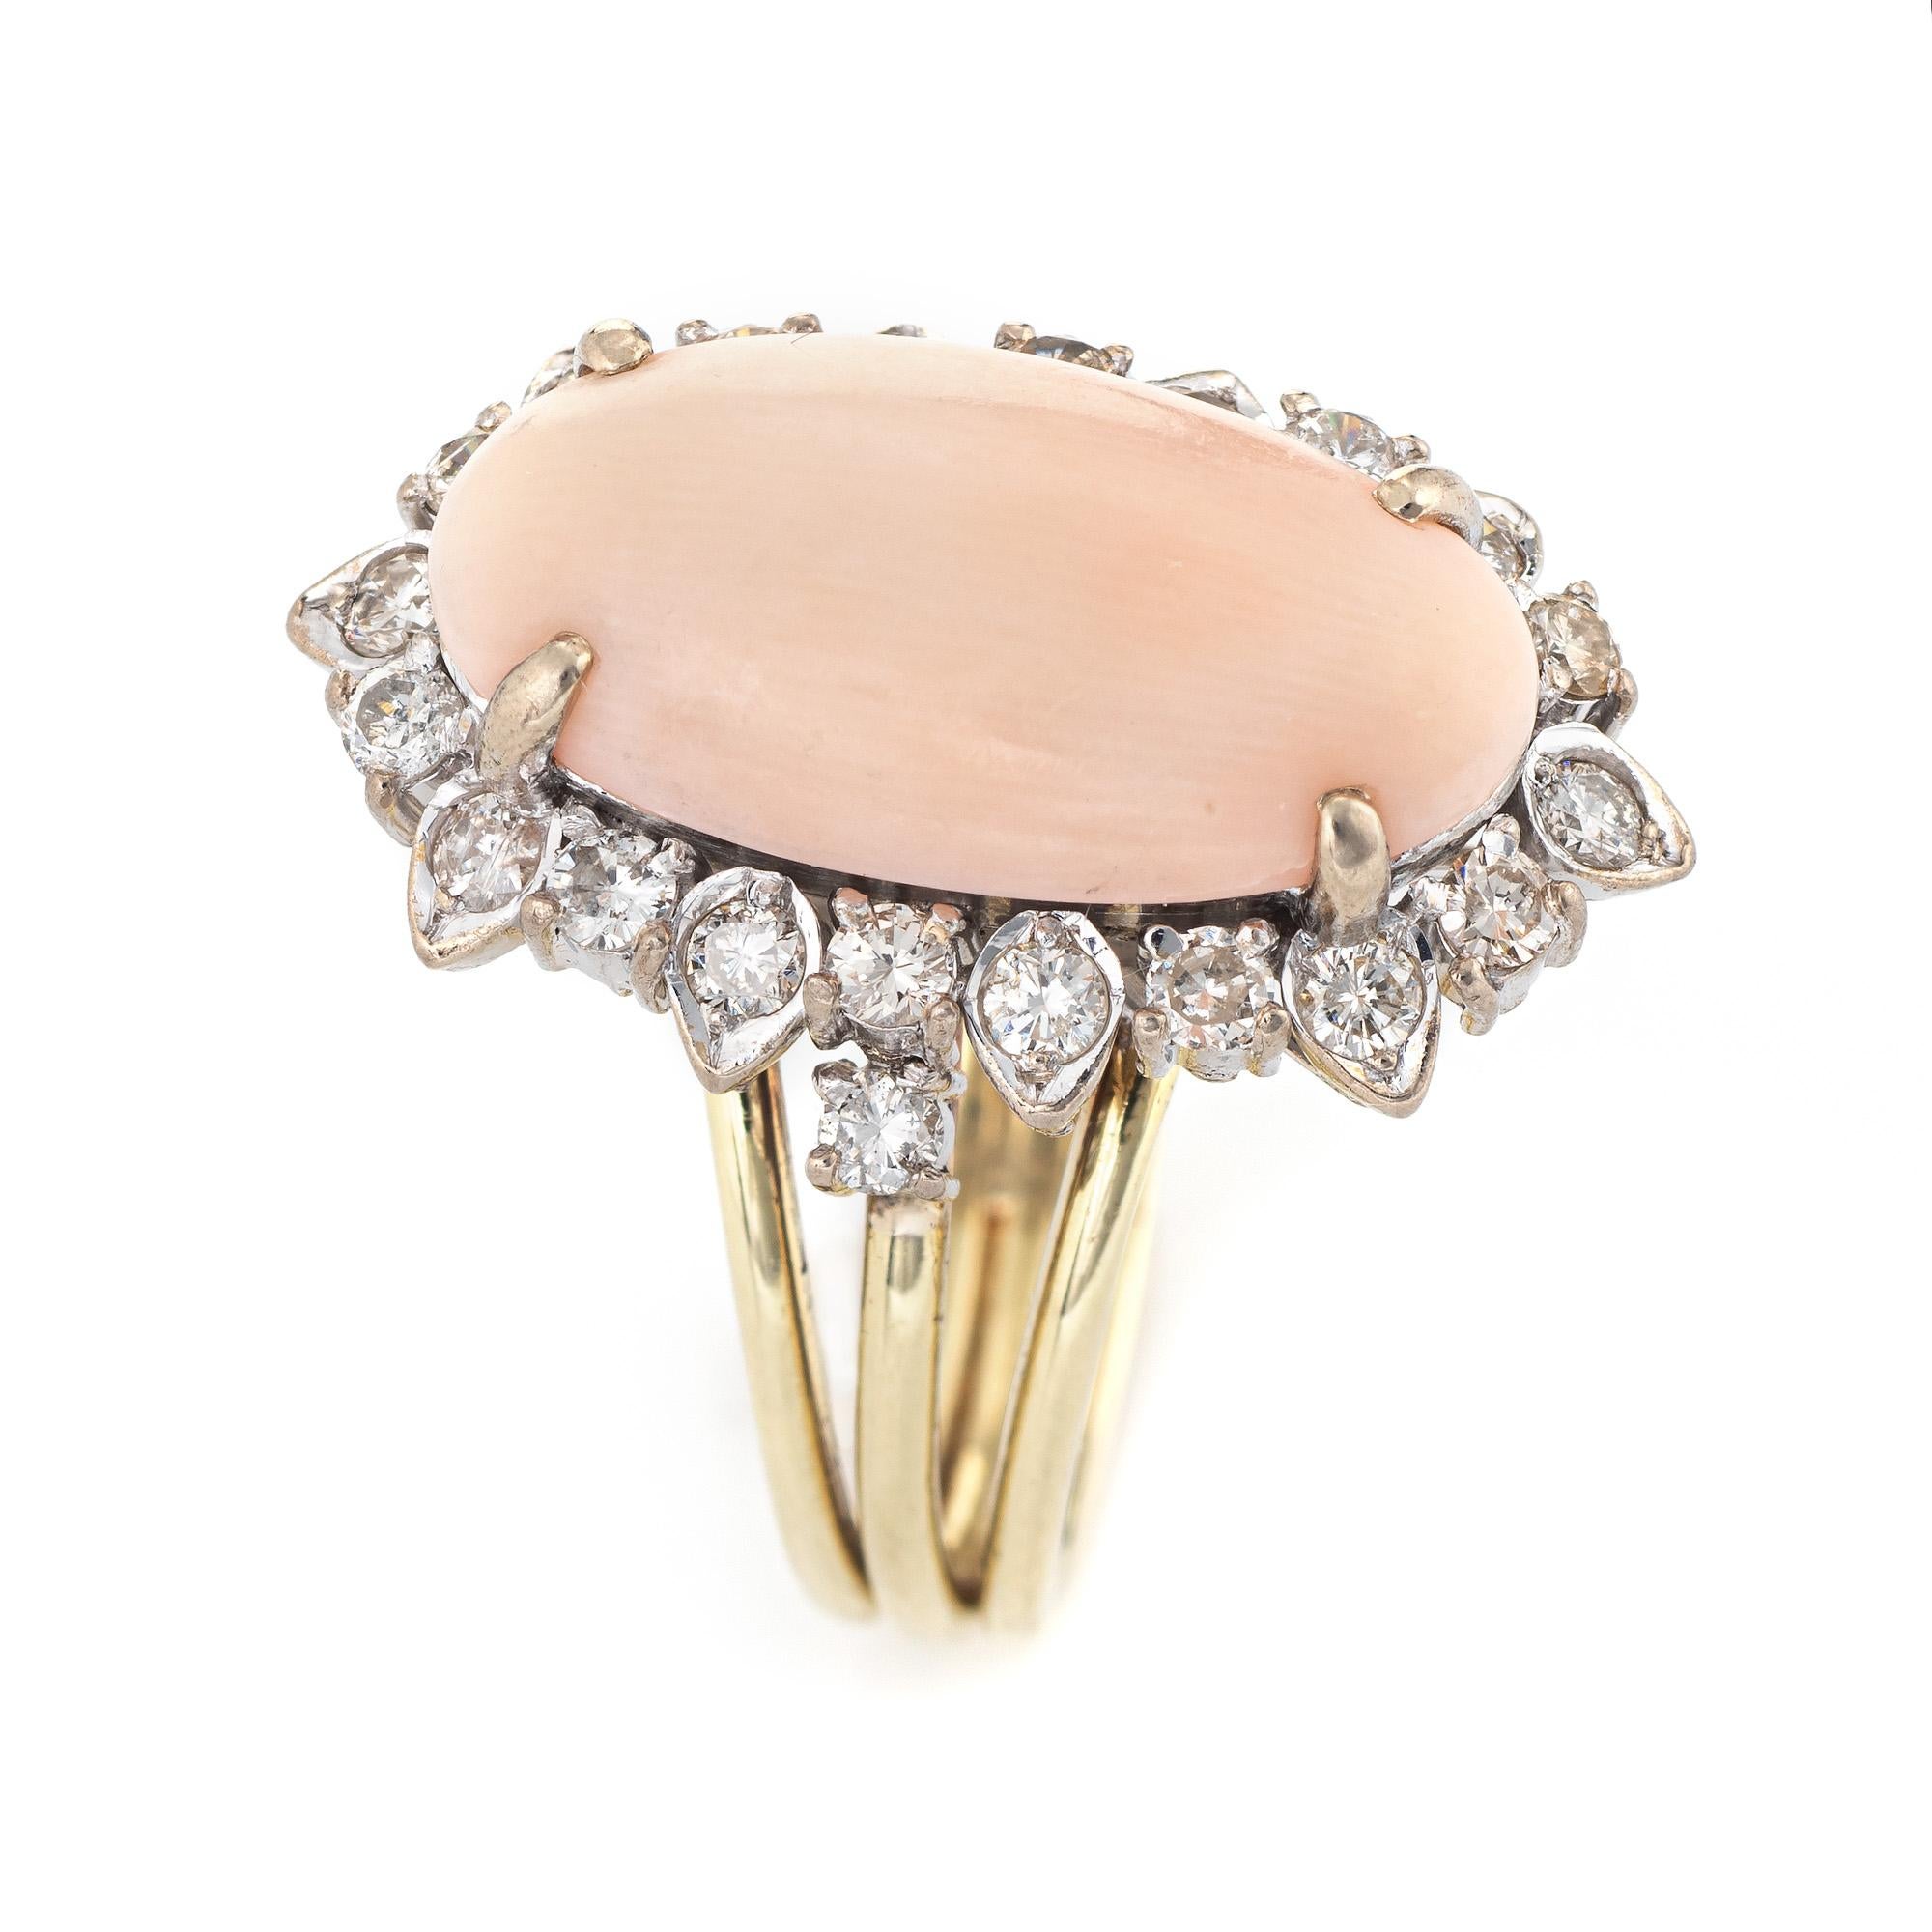 Stylish vintage coral & diamond cocktail ring (circa 1950s to 1960s) crafted in 14 karat yellow gold. 

Angel skin coral is cabochon cut measuring 17mm x 9mm (estimated at 4.50 carats), accented with 23 estimated 0.02 carat diamonds. The total